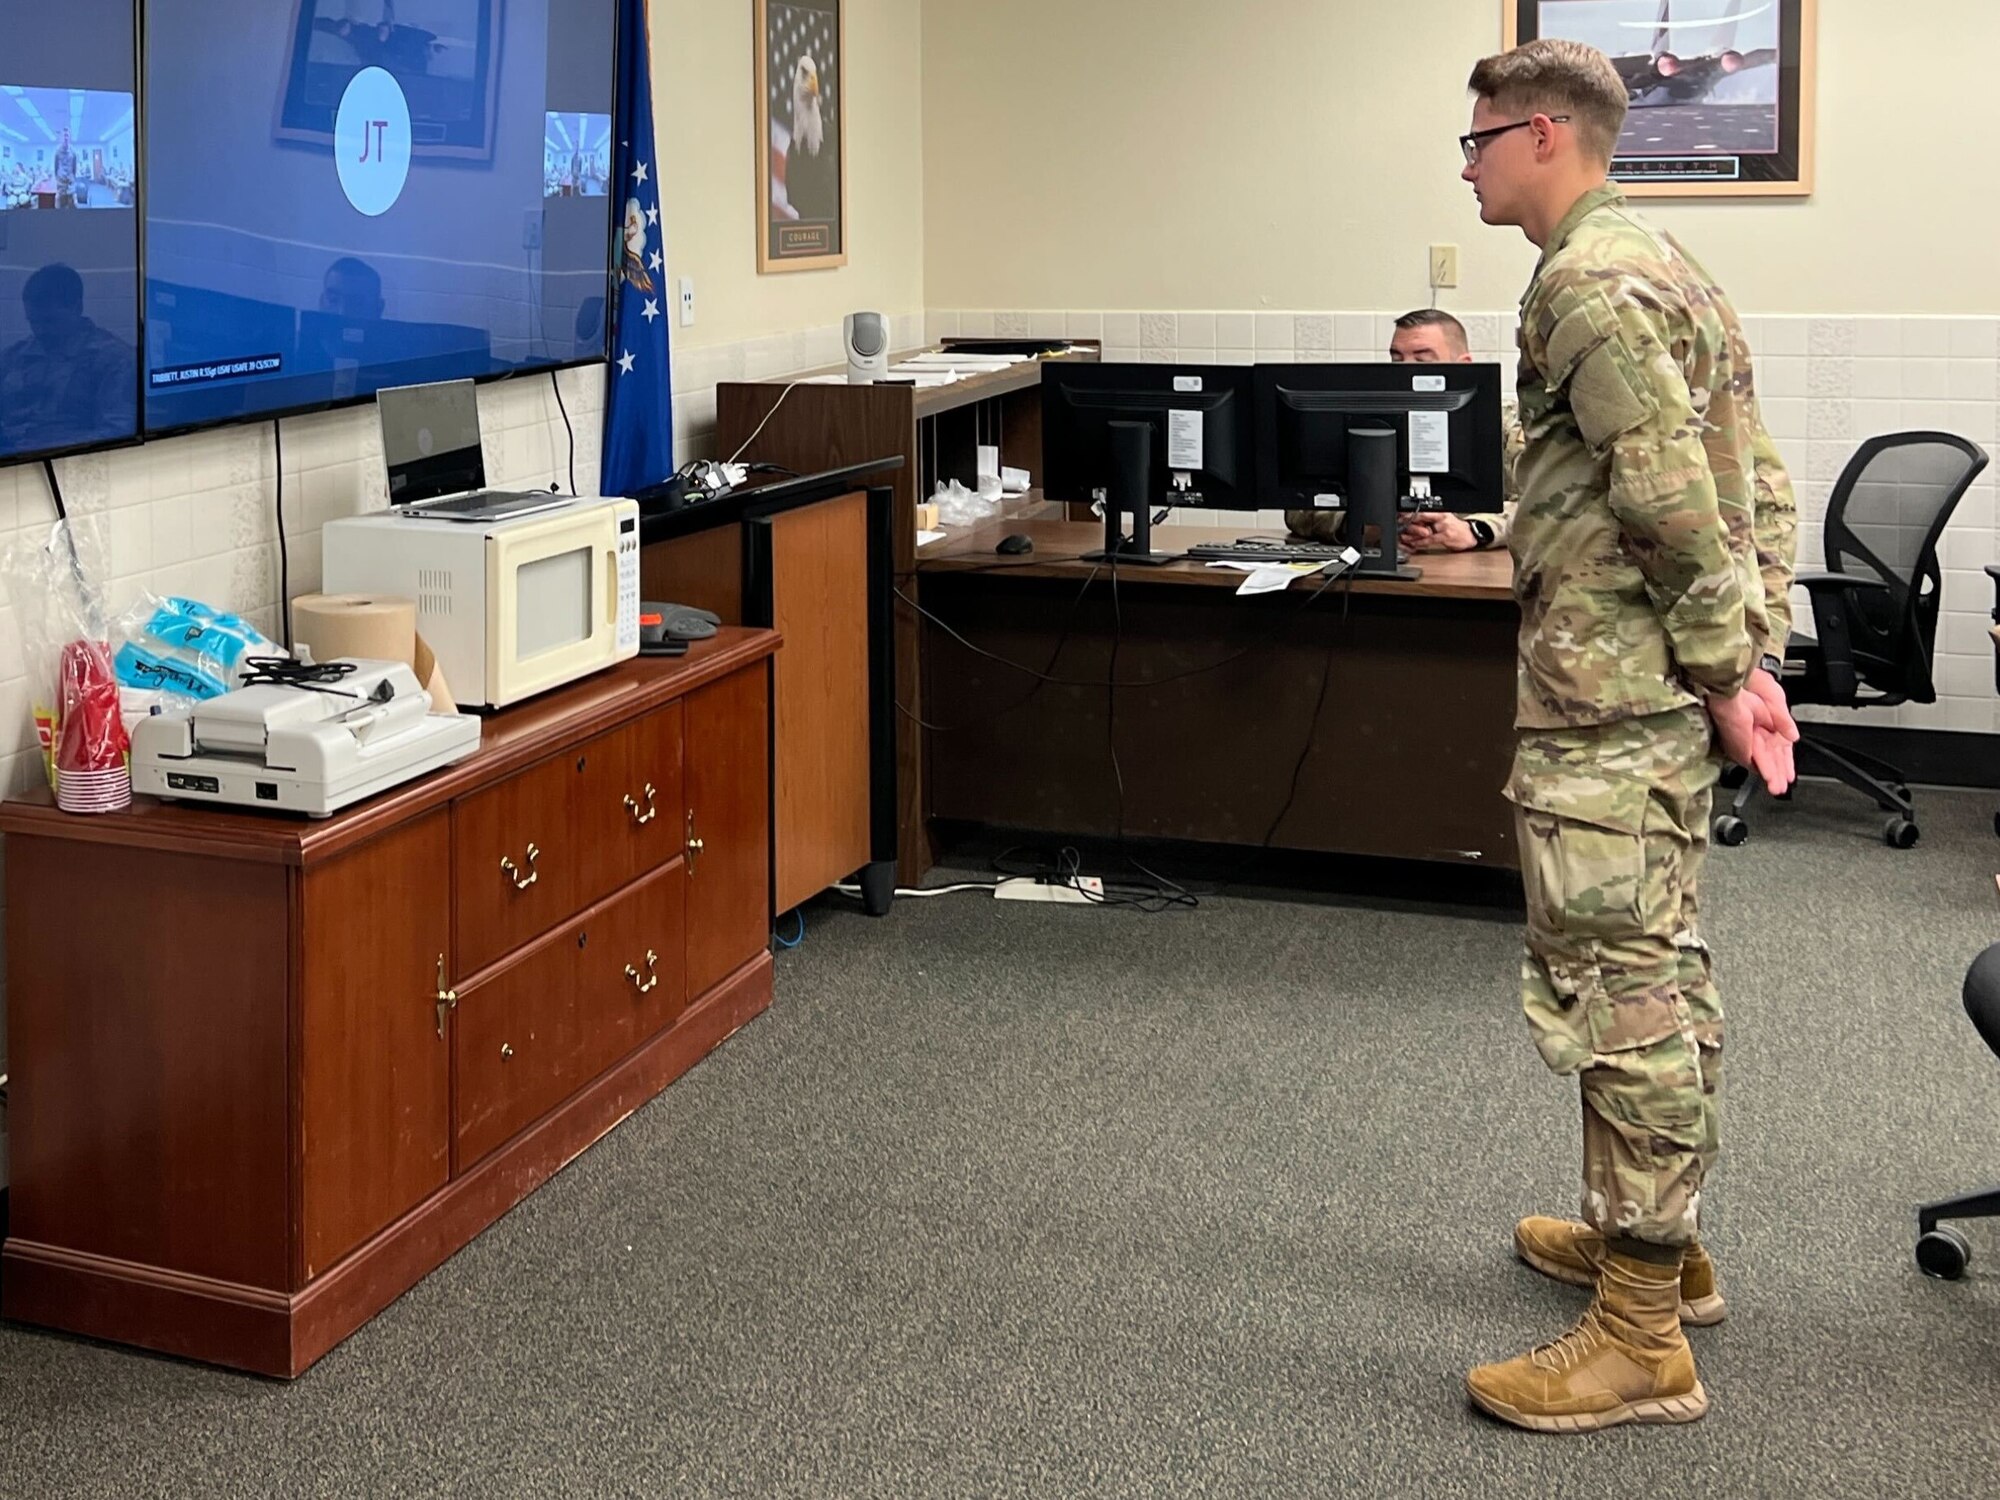 Airmen sit in a conference room. One Airman stands in front of a screen.